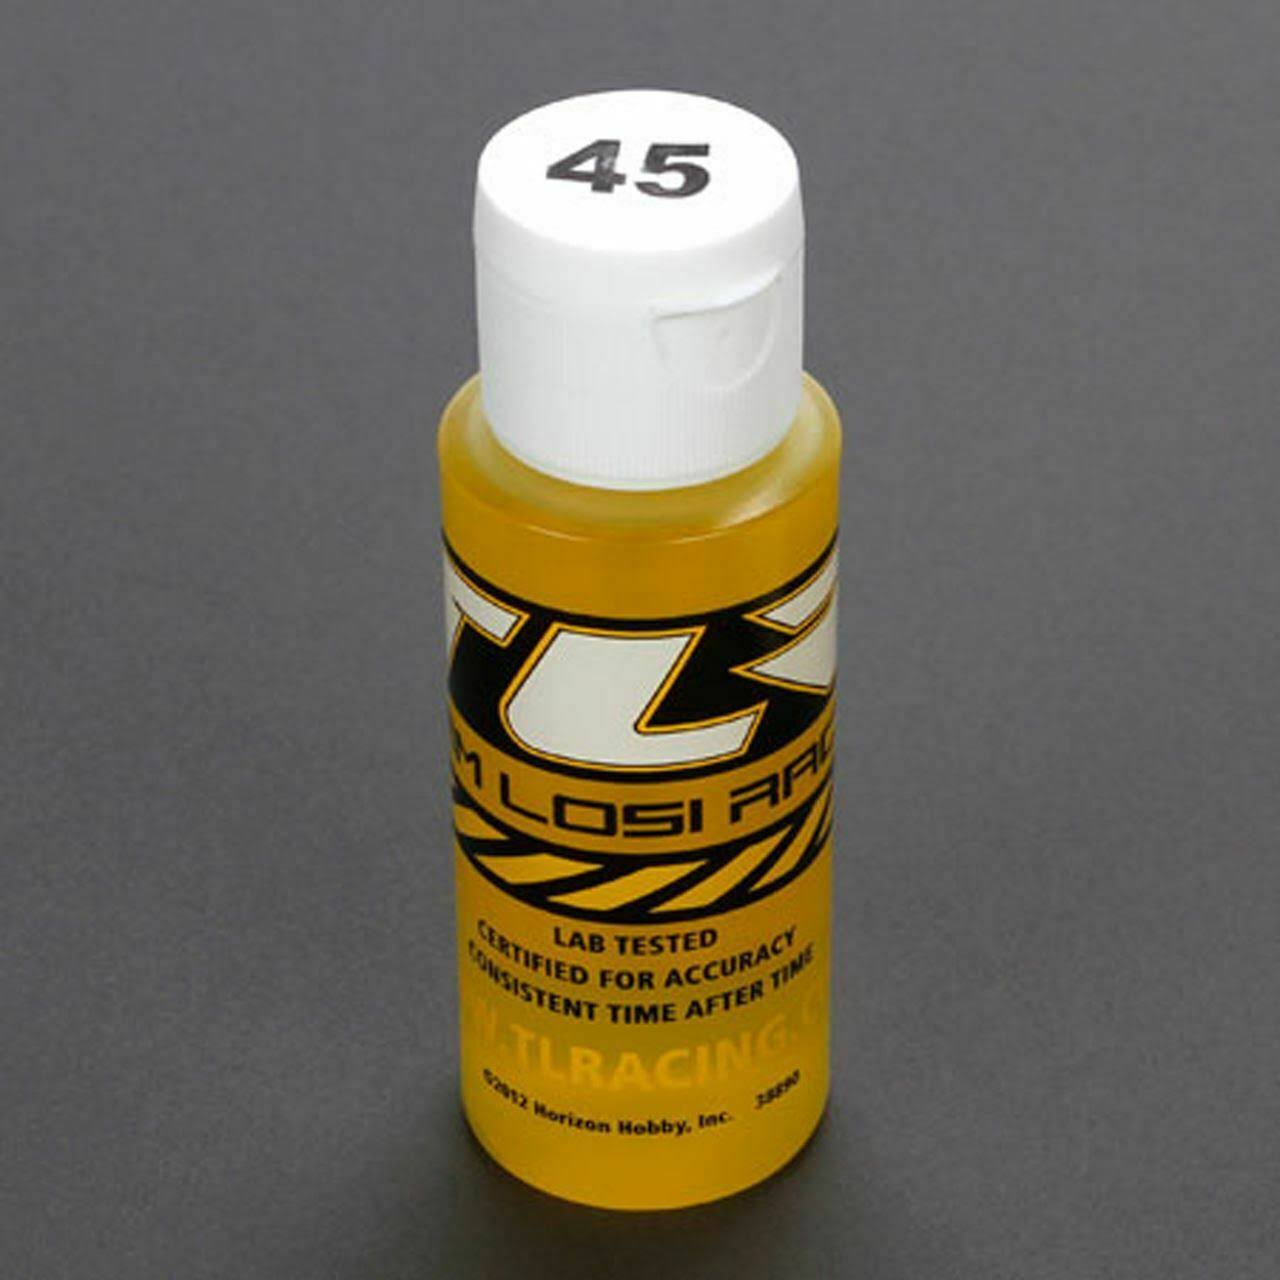 TEAM LOSI RACING Silicone Shock Oil, 45wt, 2oz, TLR74012